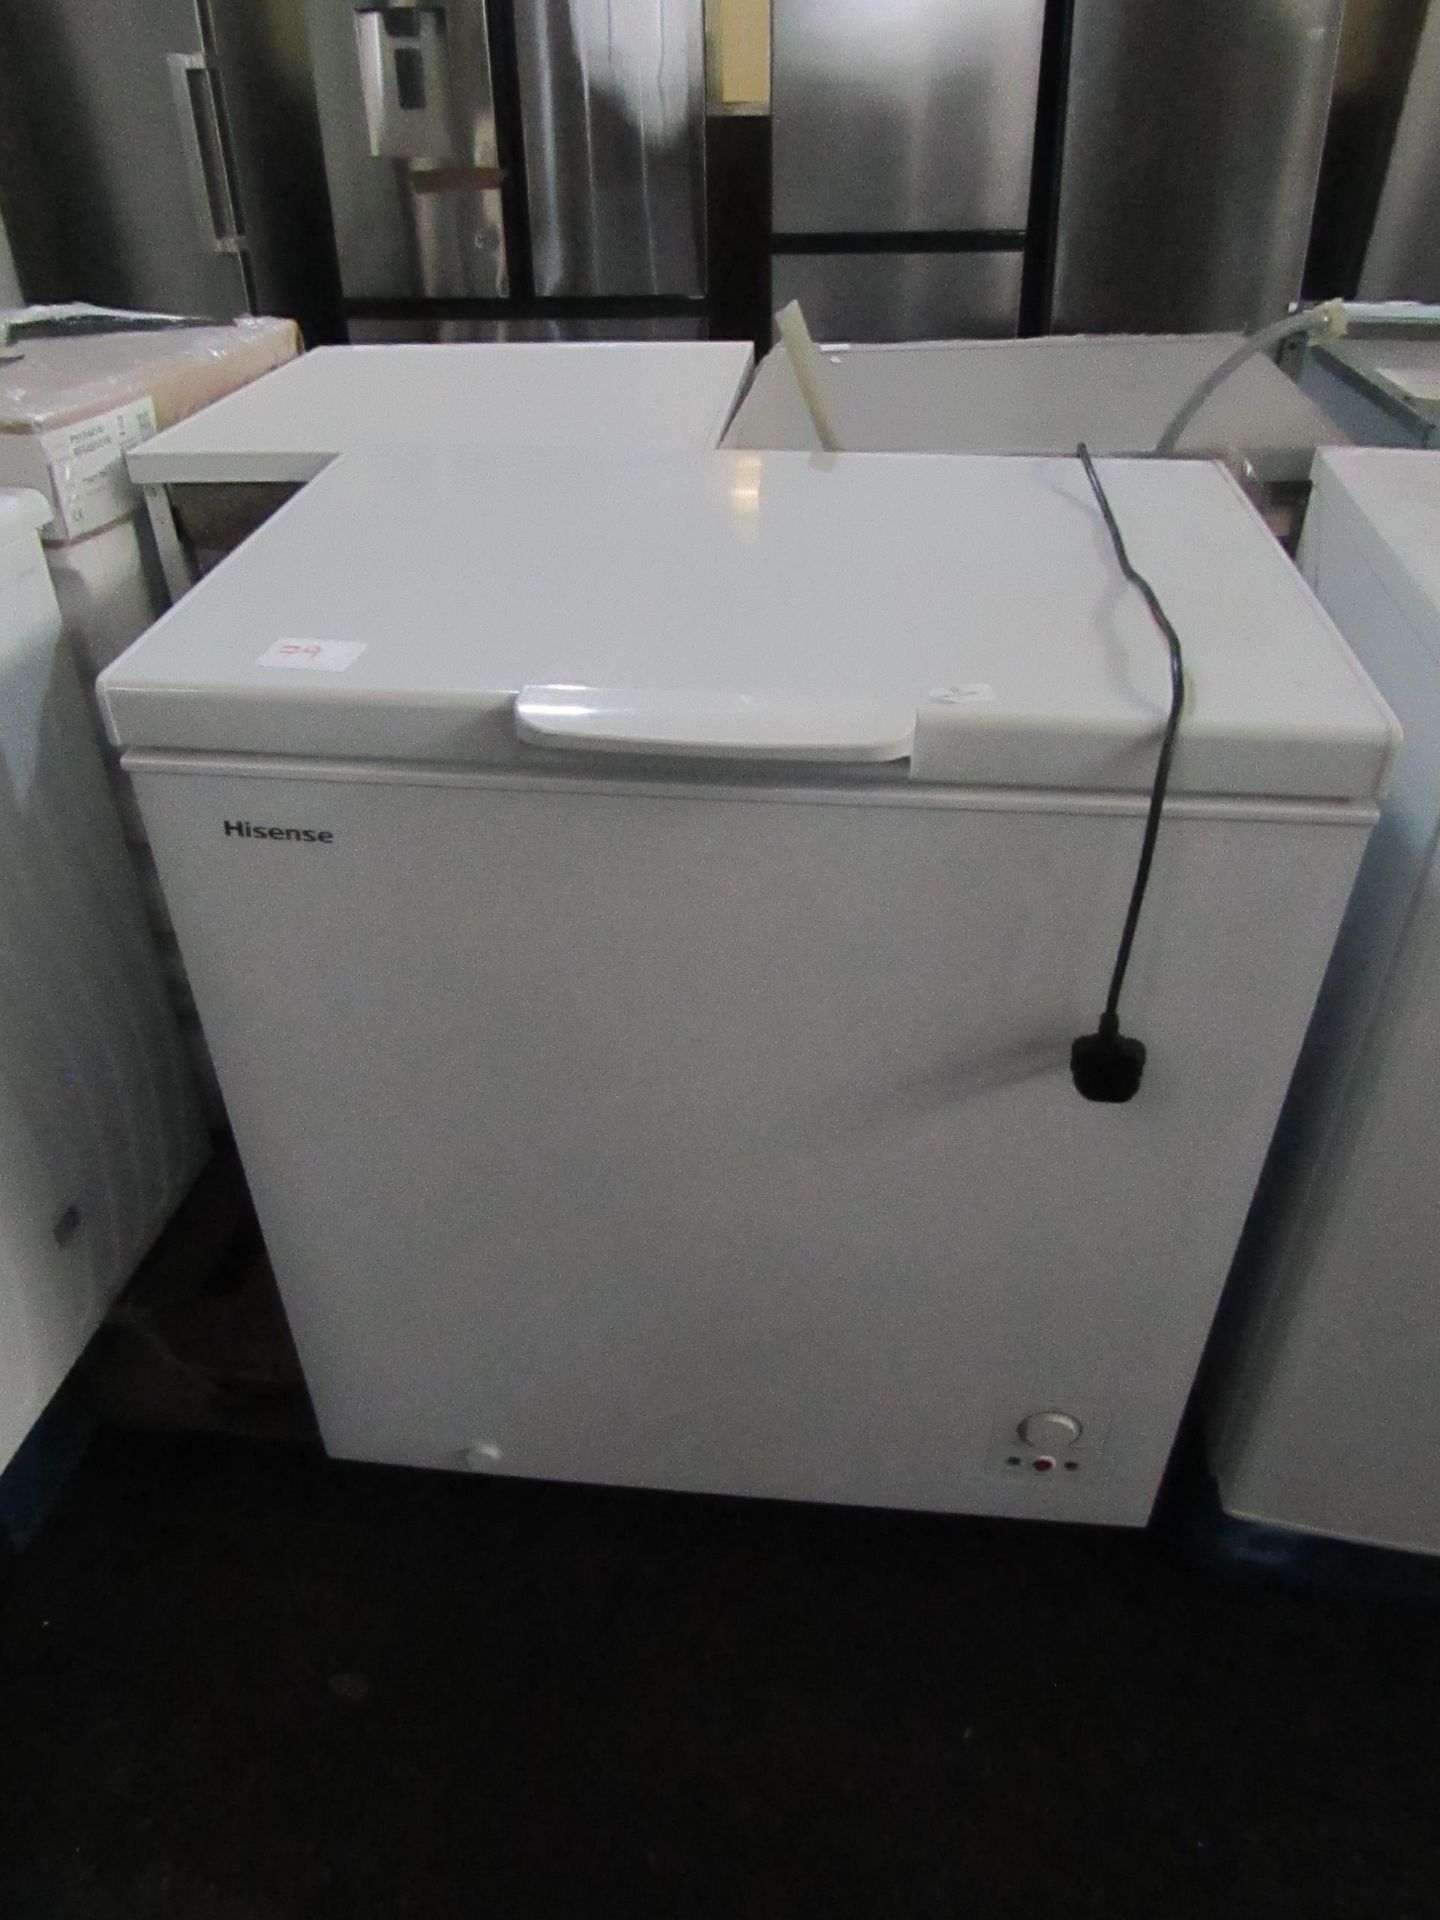 Hisense Chest freezer, powers on and gets cold, has a couple of small marks on it but other wise